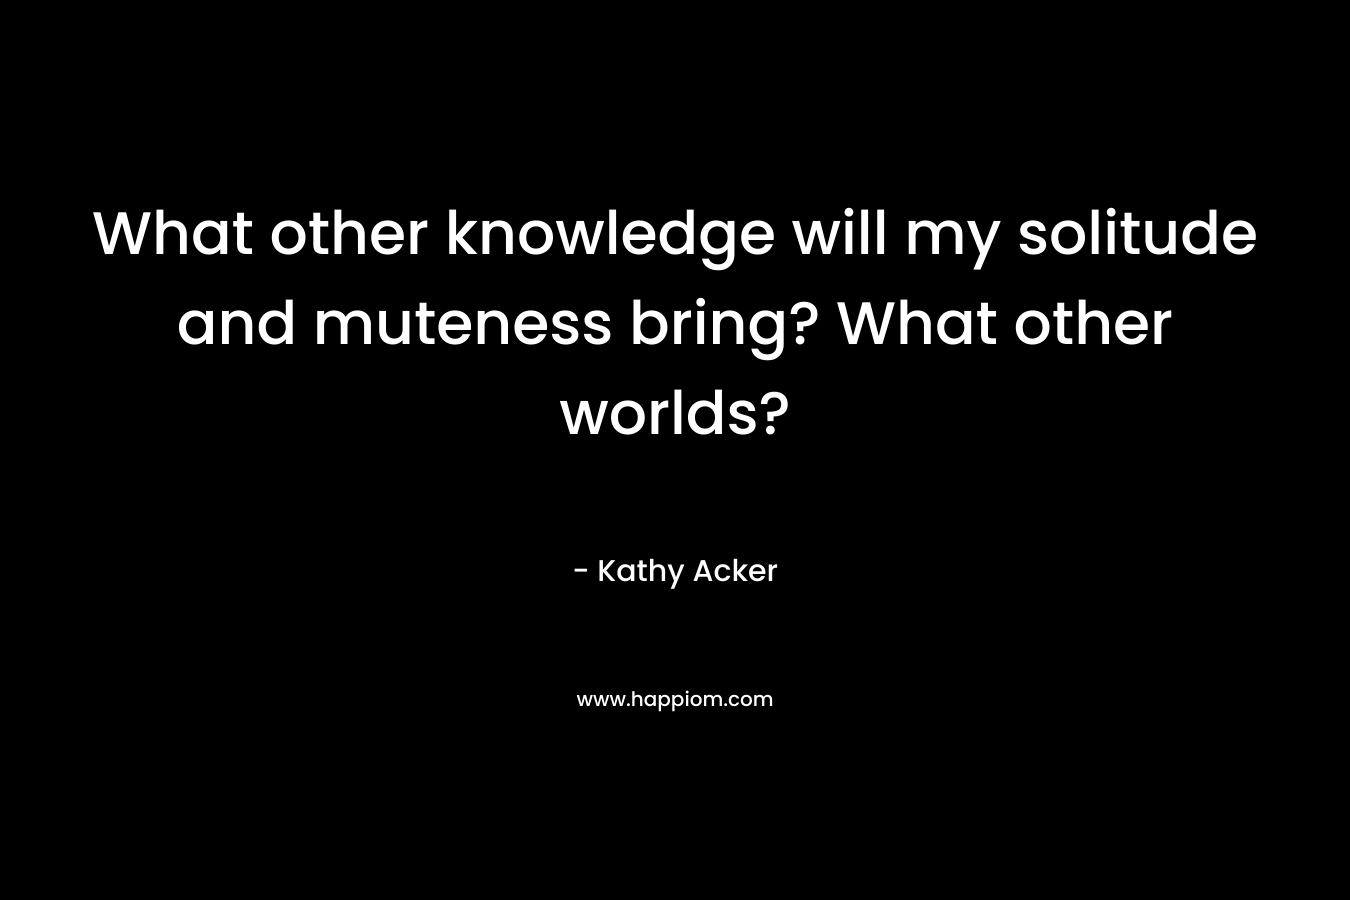 What other knowledge will my solitude and muteness bring? What other worlds? – Kathy Acker